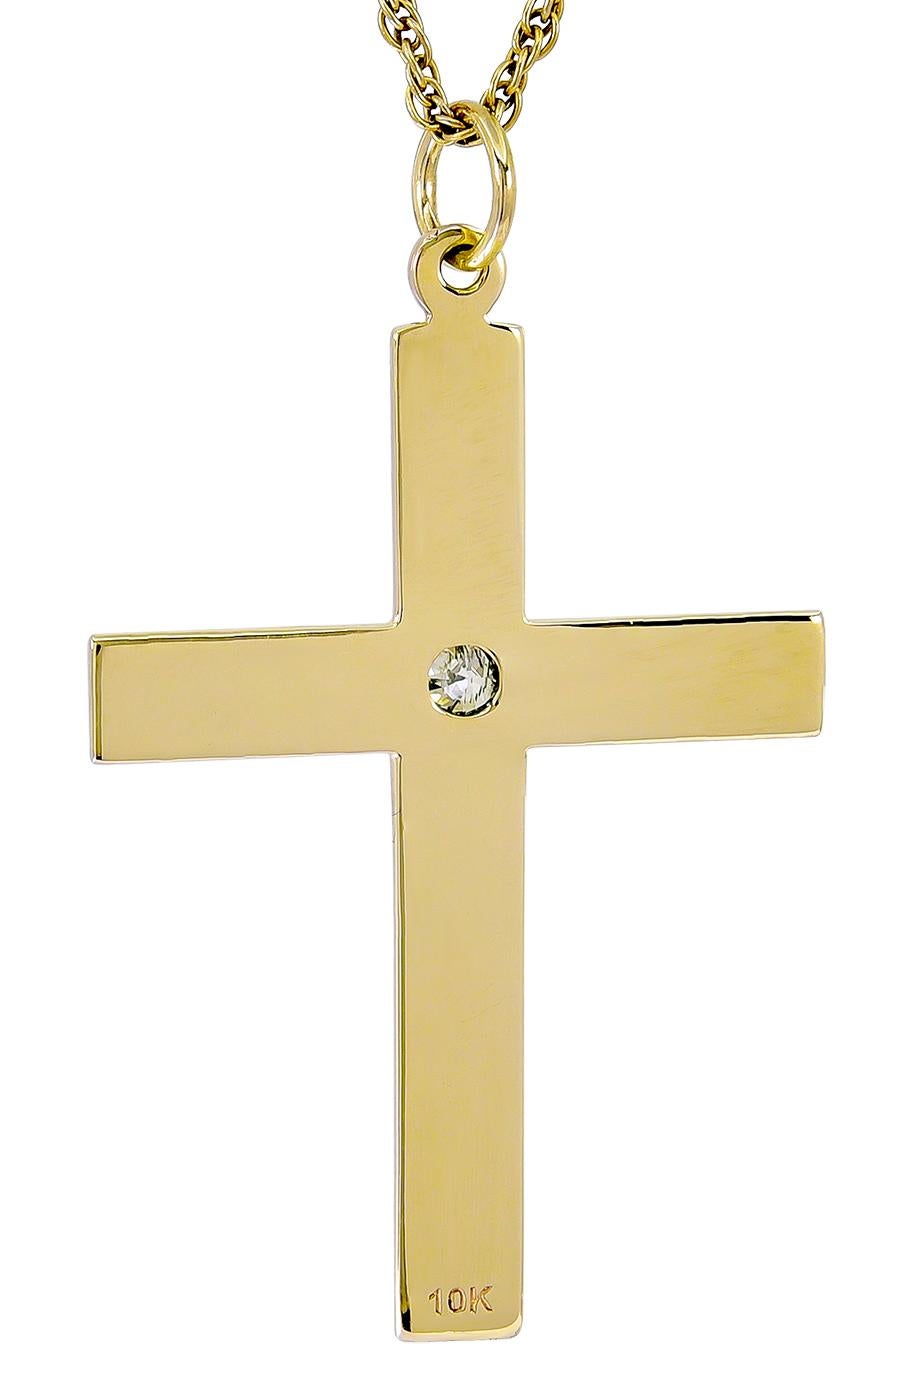 Large beautifully proportioned antique cross, set with a faceted diamond (approximately .20 cts).  10K yellow gold with fine patina.  2